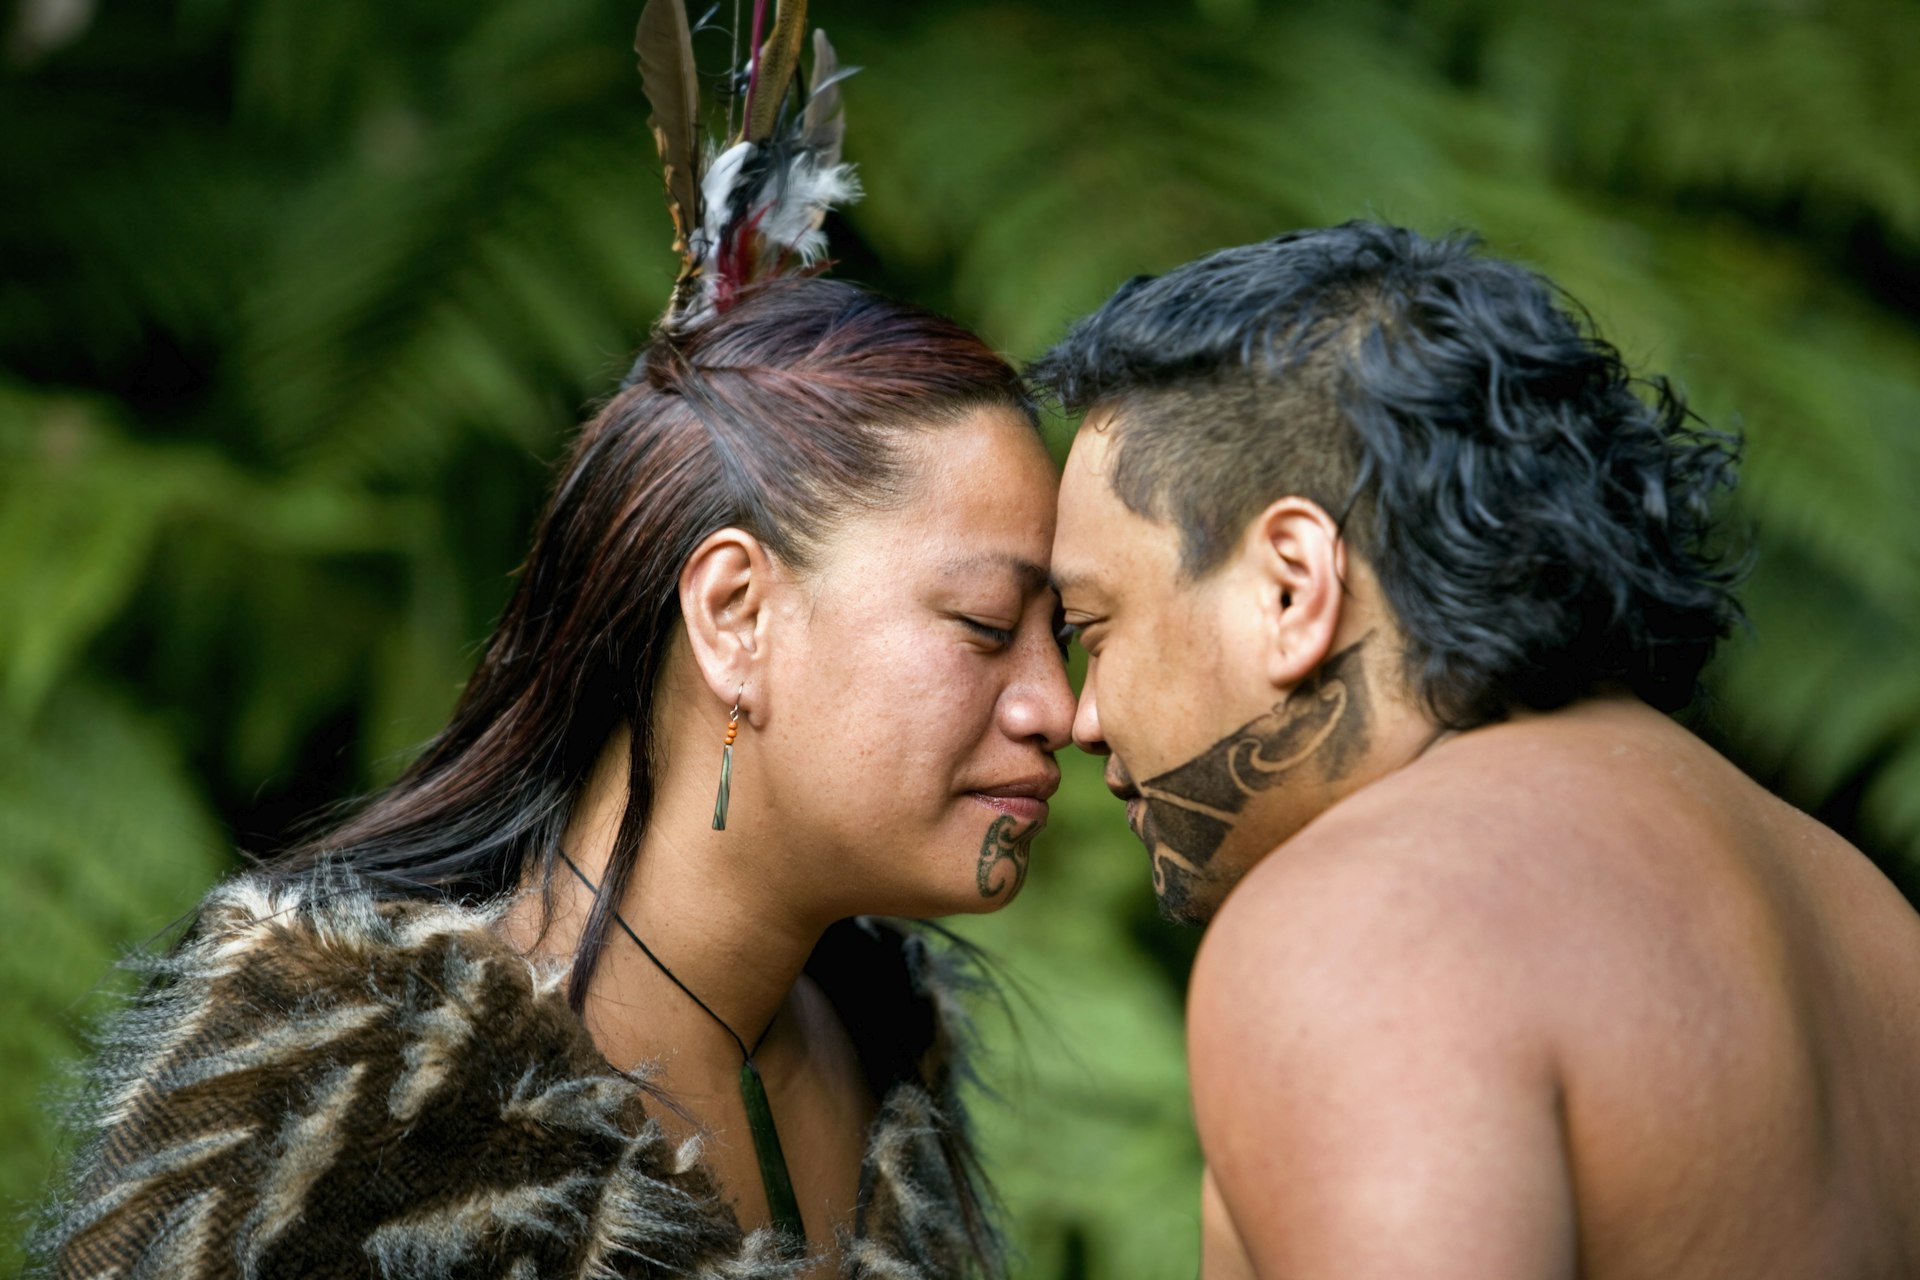 A couple touch heads during a Maori hongi greeting in New Zealand